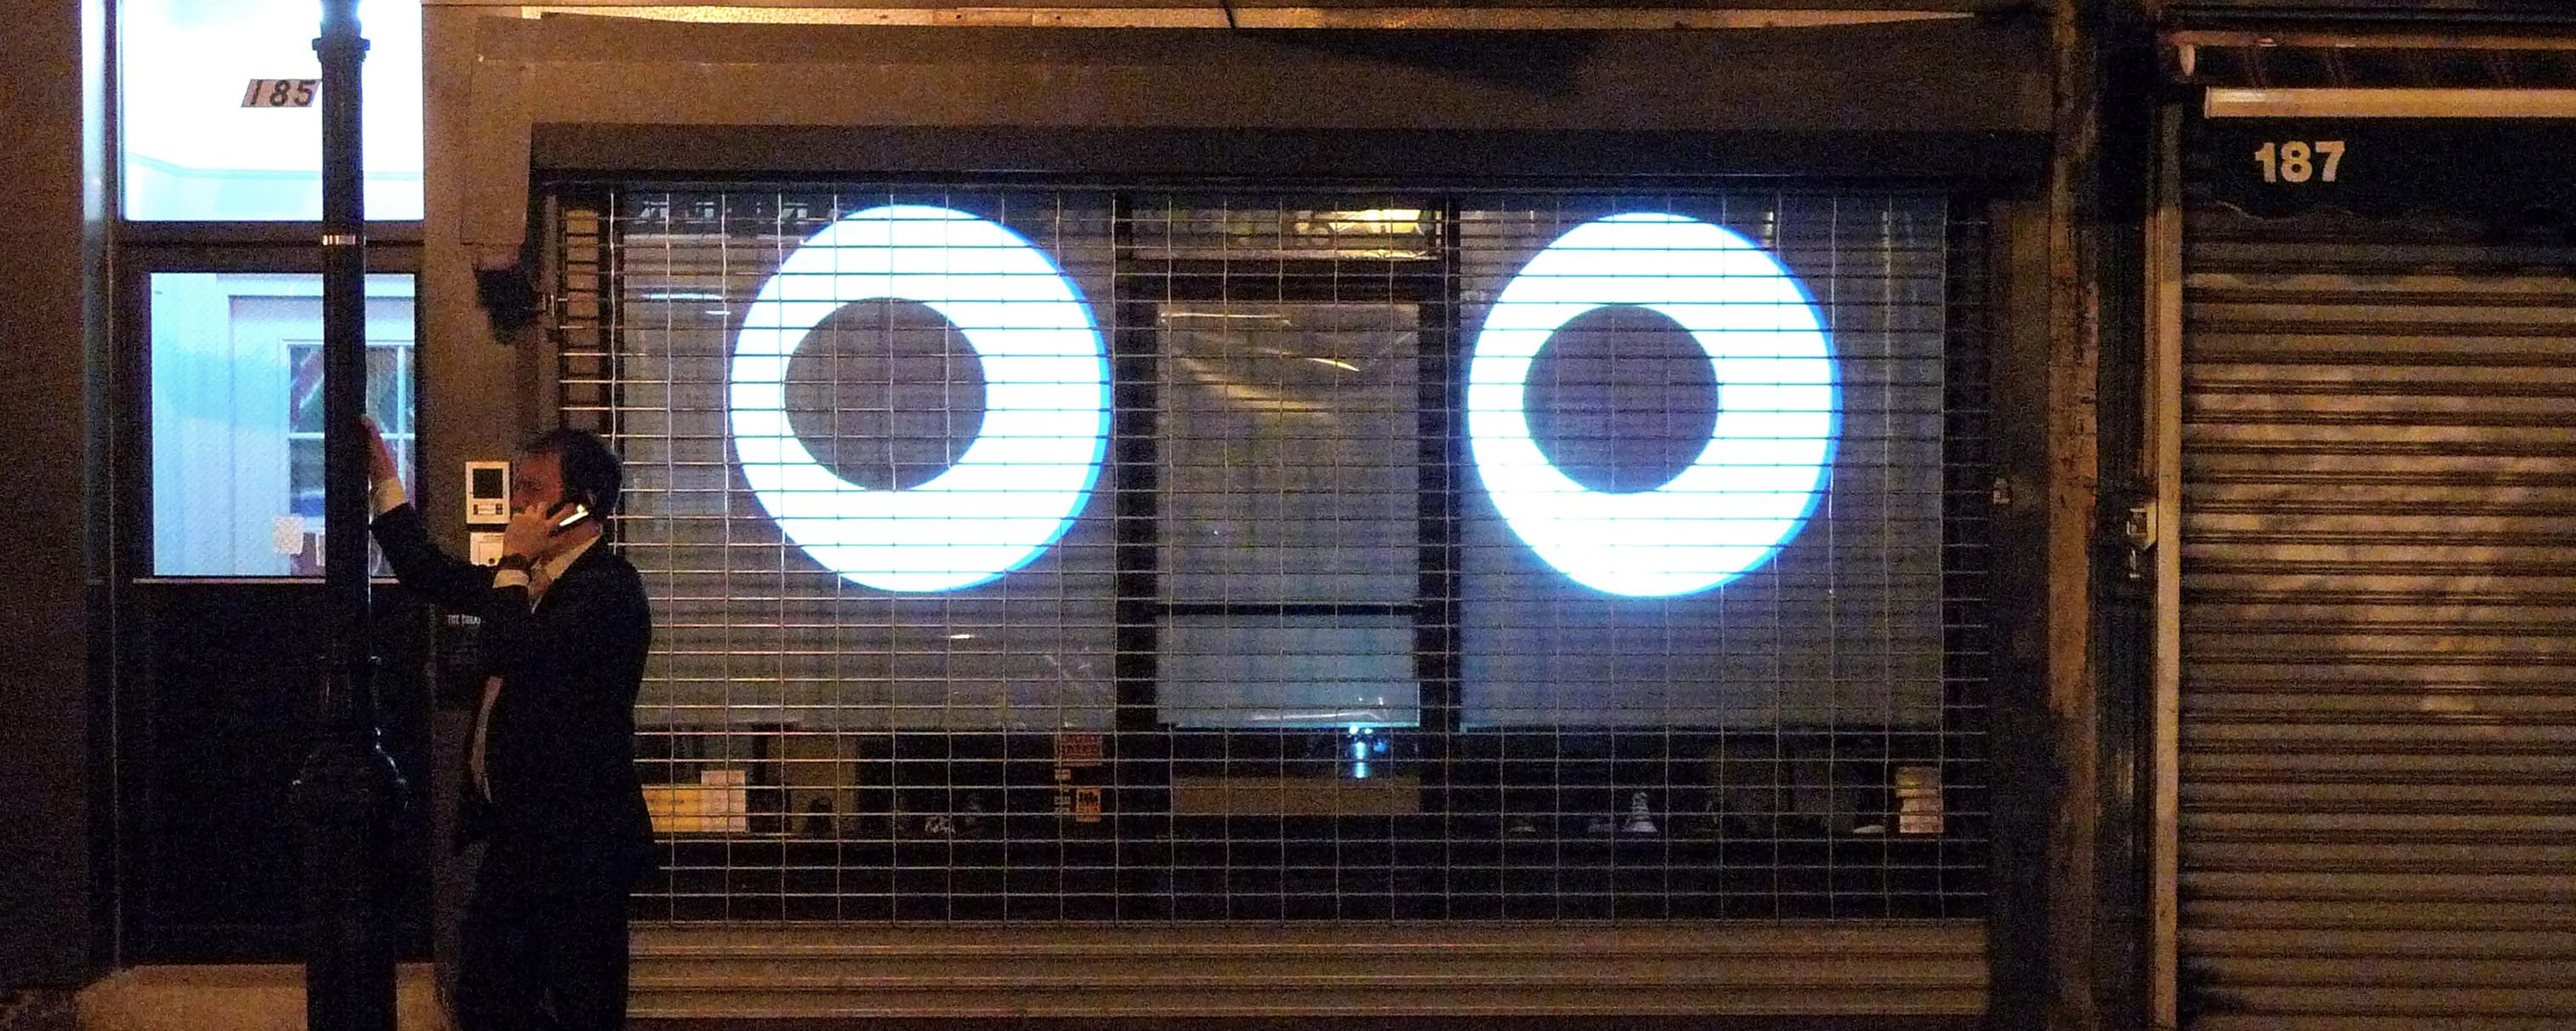 Nighttime photograph of an urban dweller on a cellphone, leaning against a lamppost on the far right side of the frame. Occuping the rest of the frame are two giant cartoon-like eyes, that are projected into the gated storefront behind him. The eyes are eyeing him; he has his back to them, seemingly oblivious to their presence.